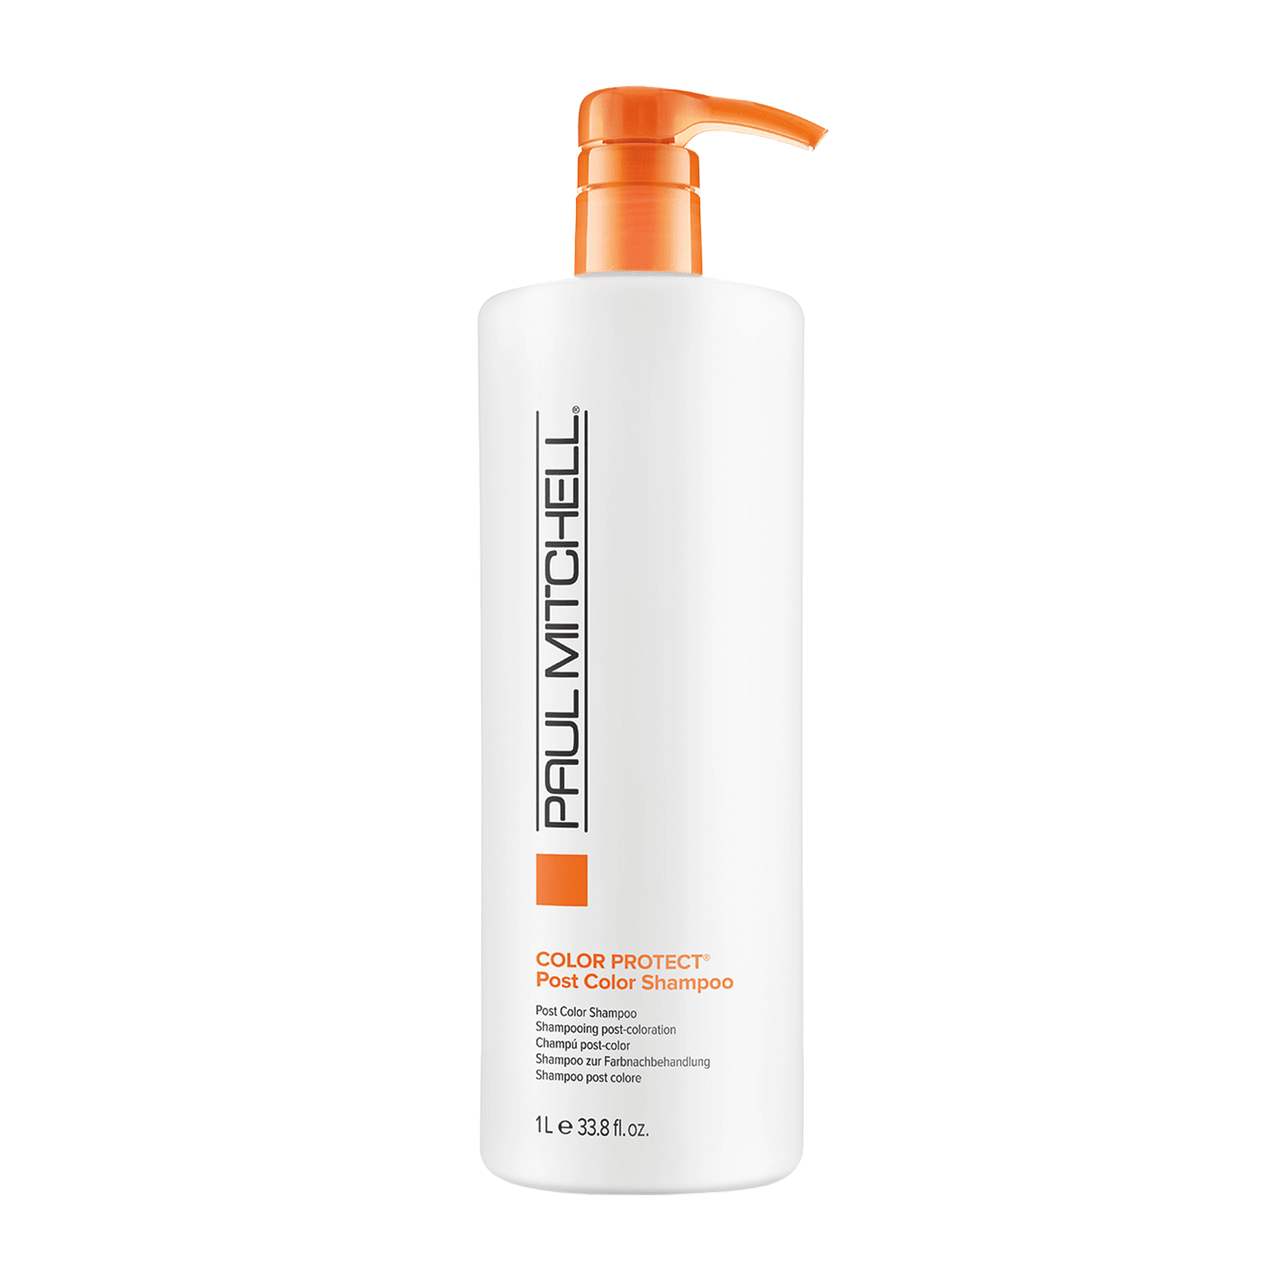 PAUL MITCHELL_Color Protect Post Color Shampoo 33.8oz_Cosmetic World